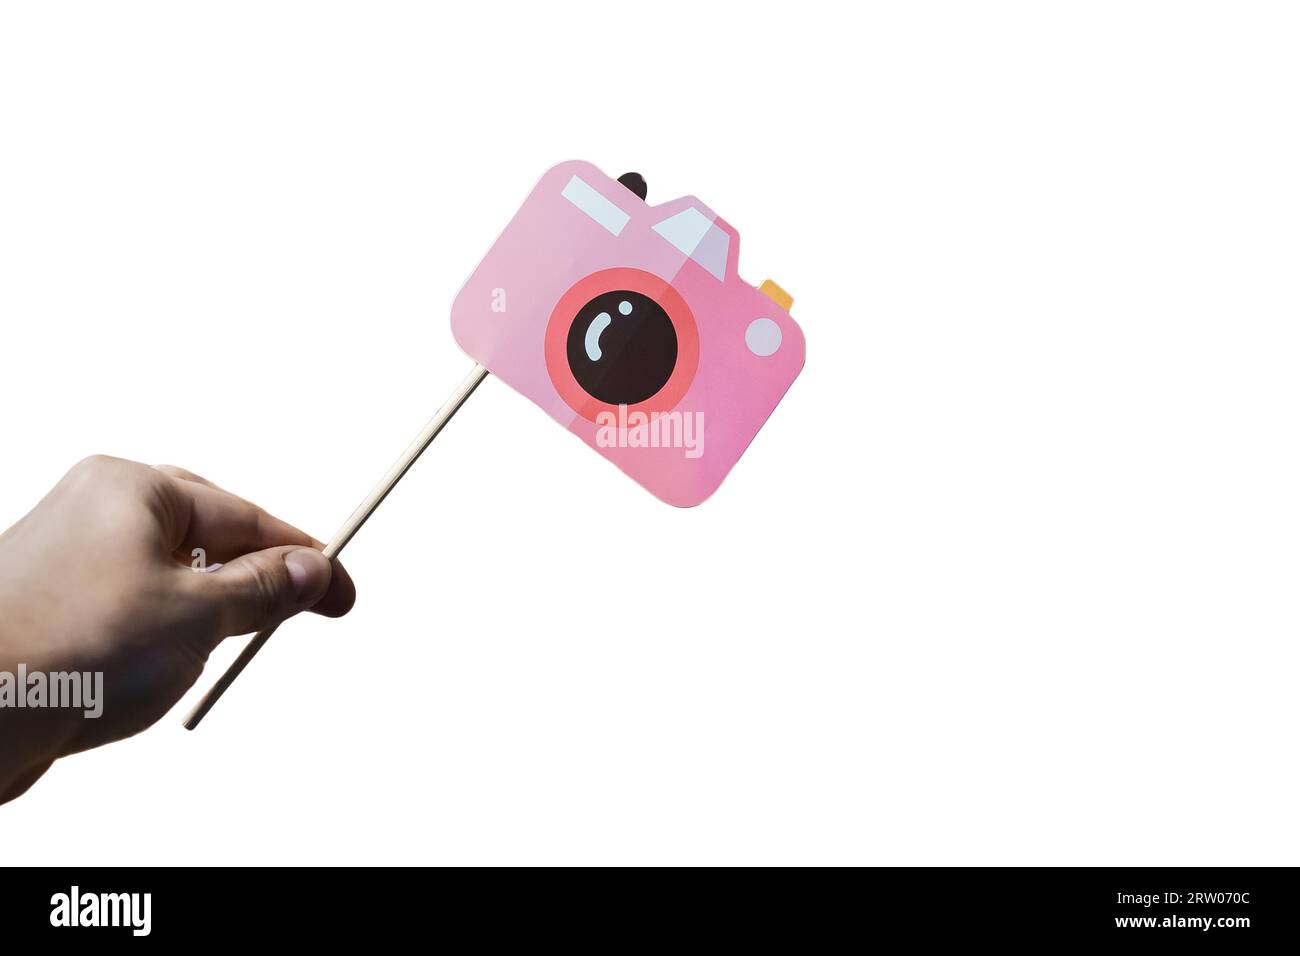 A photo object props, a photo booth, a camera on a stick, against the background of white isolated. Stock Photo